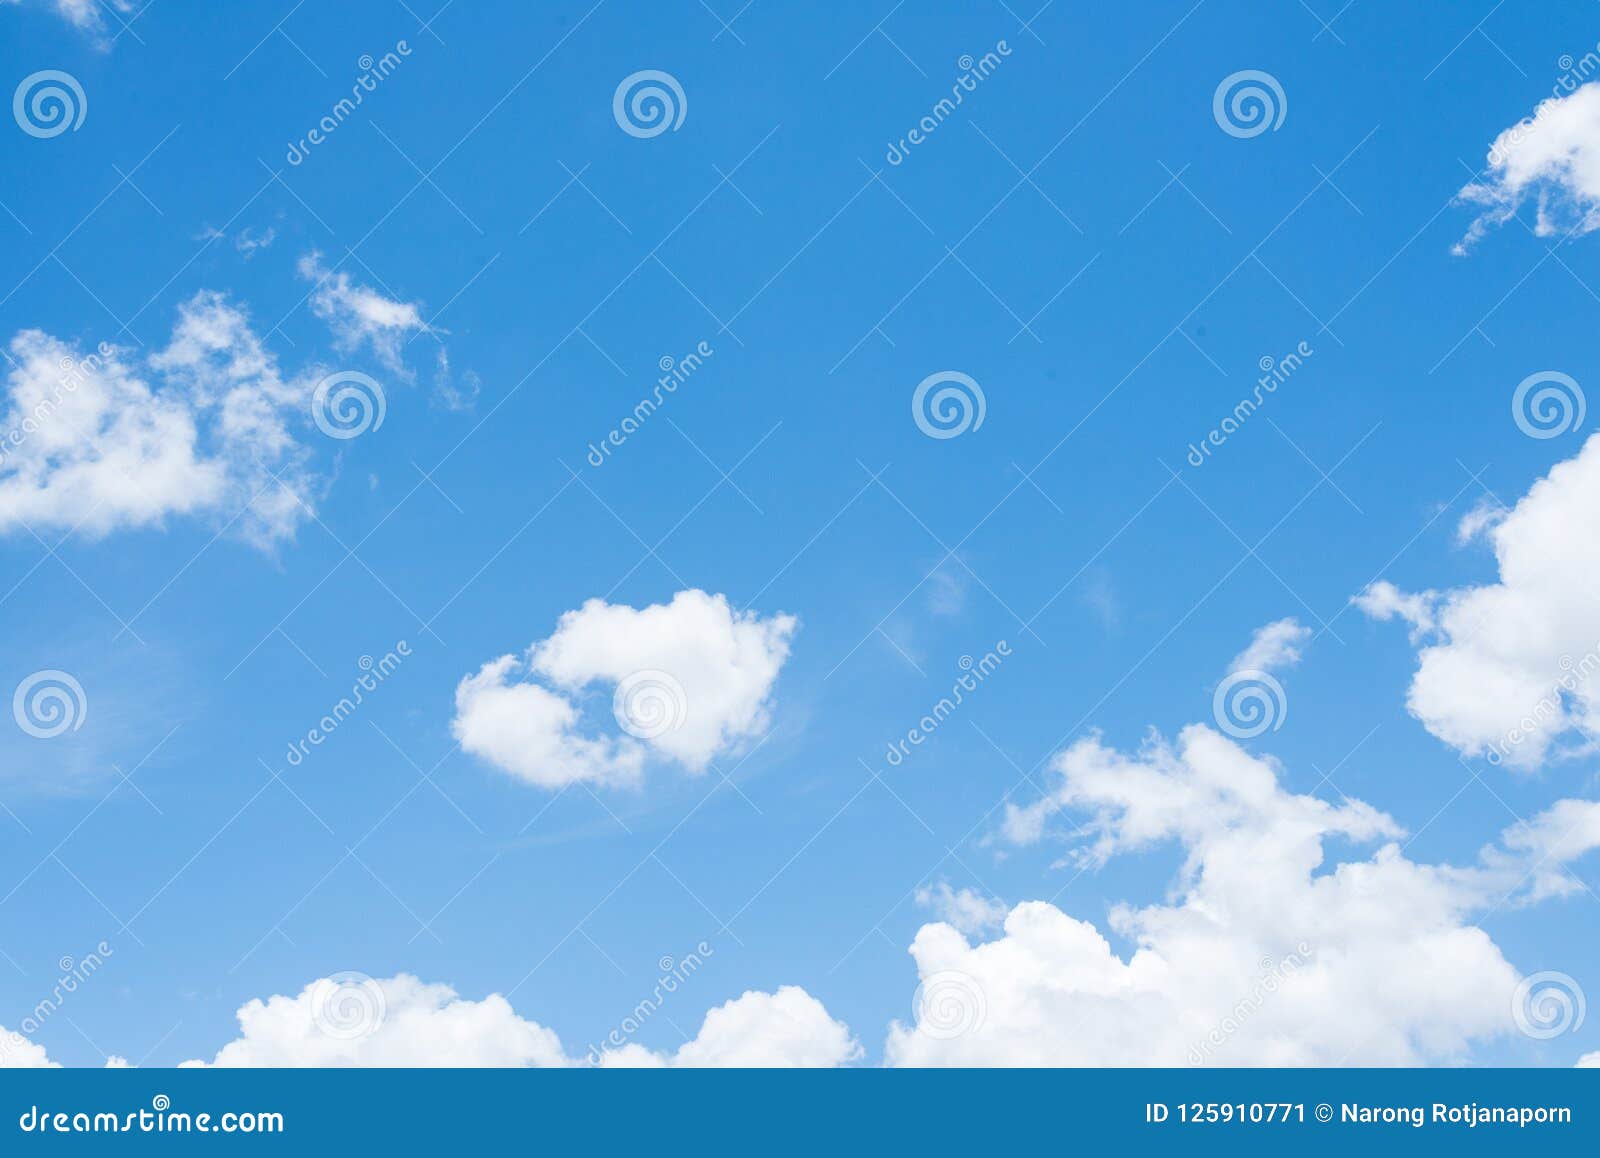 Clear Blue Sky Background,clouds with Background Stock Image - Image of ...